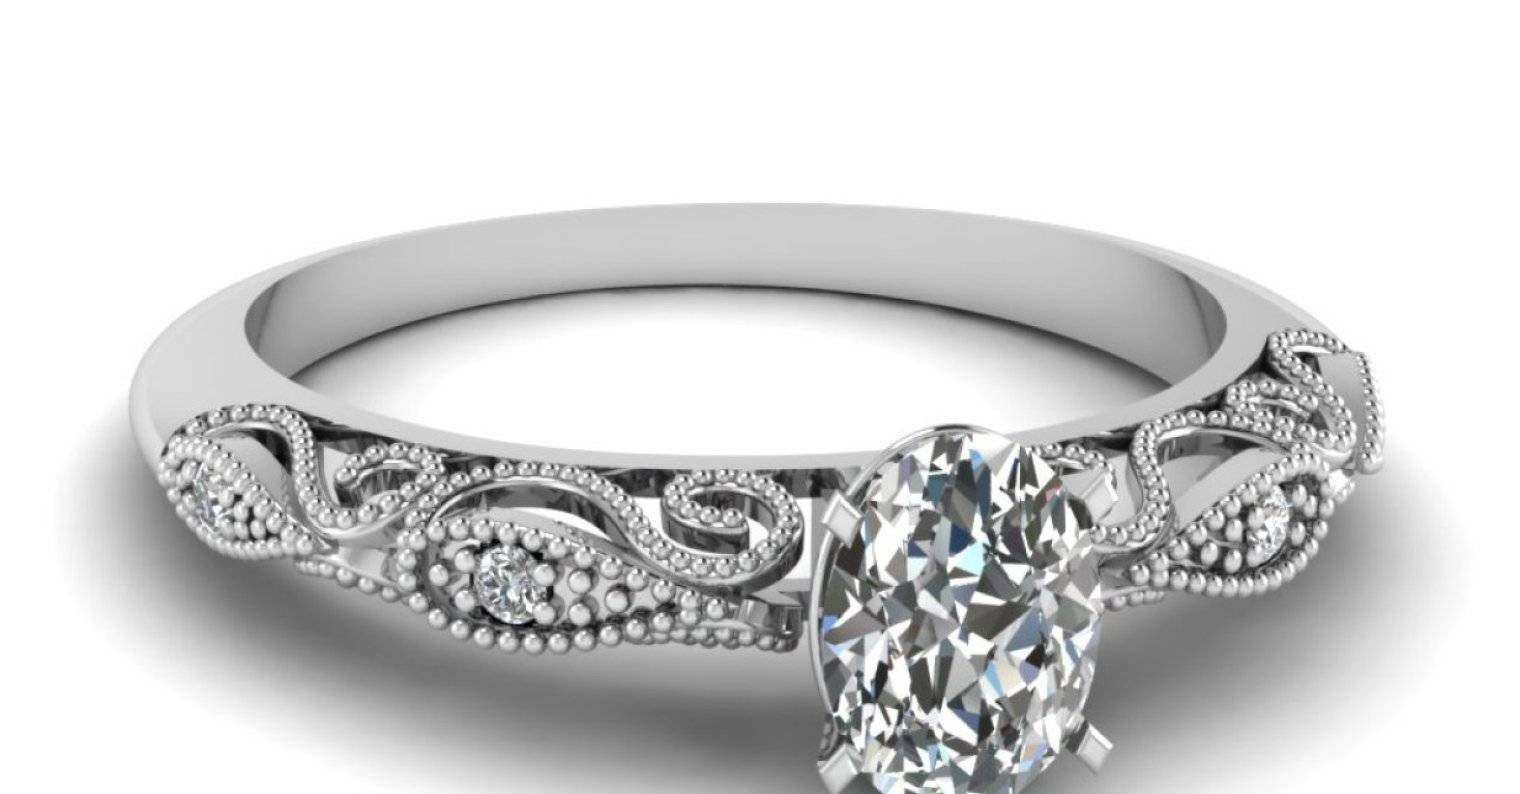 Jcpenney Jewelry Wedding Rings
 15 Best Collection of Jcpenney Jewelry Wedding Bands